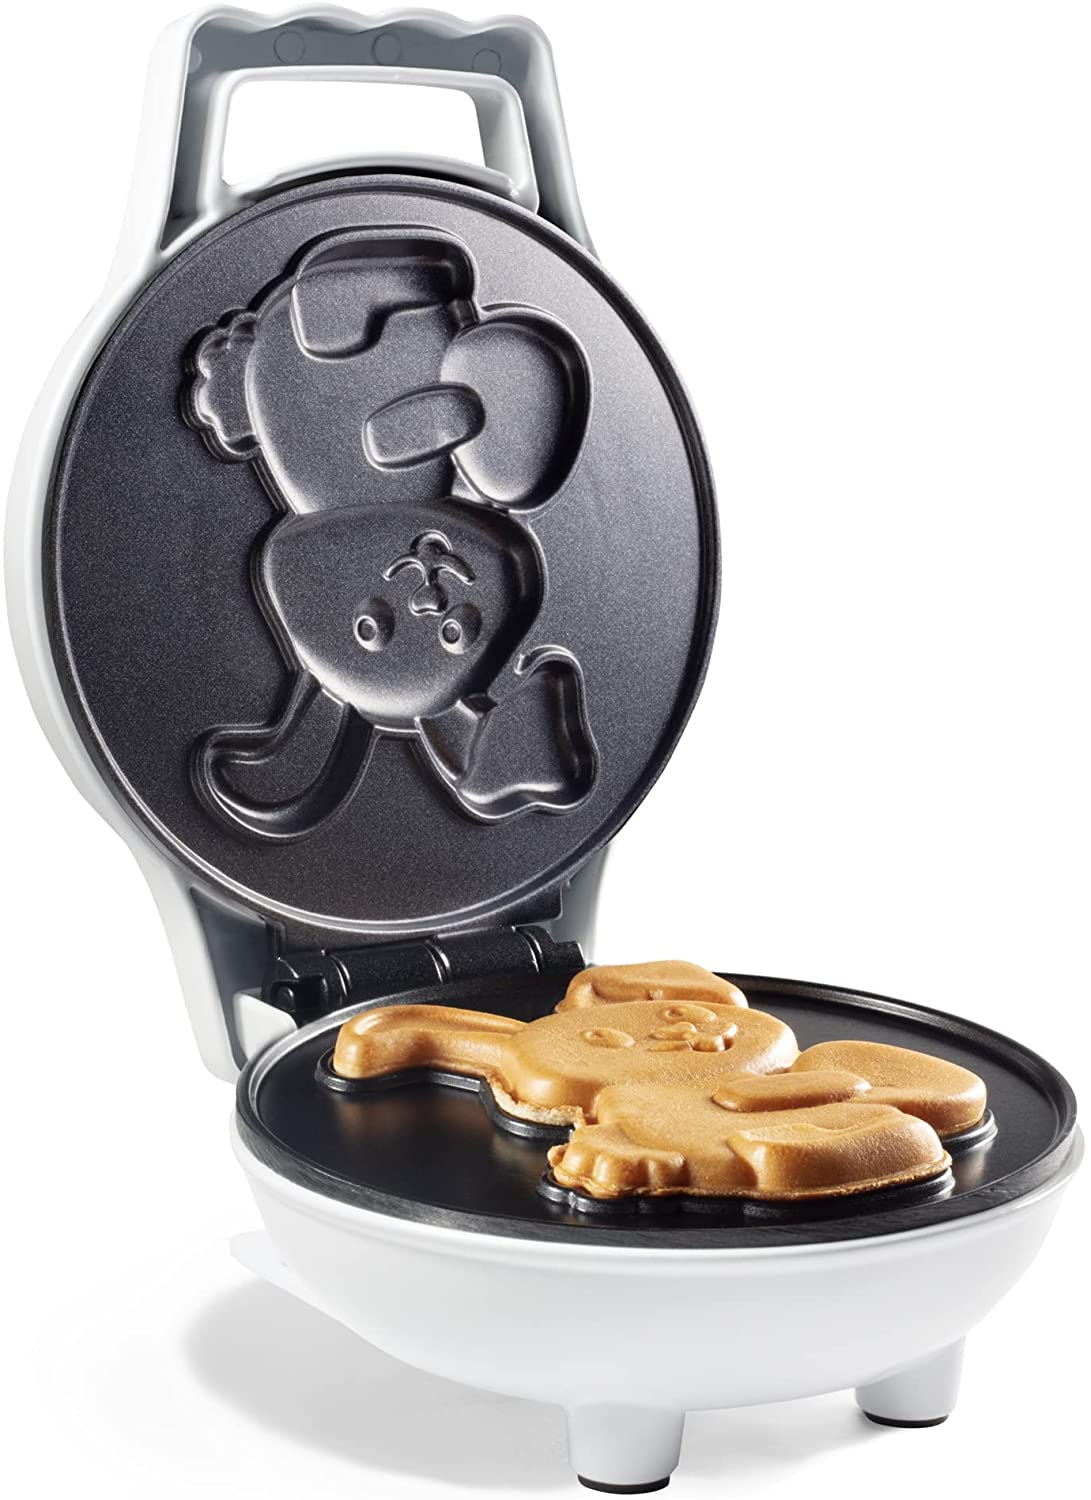 Easter Bunny Mini Waffle Maker - Make Holiday Breakfast Special for Kids & Adults with Cute Bunny Waffles or Pancakes - Individual 4 inch Waffler Iron